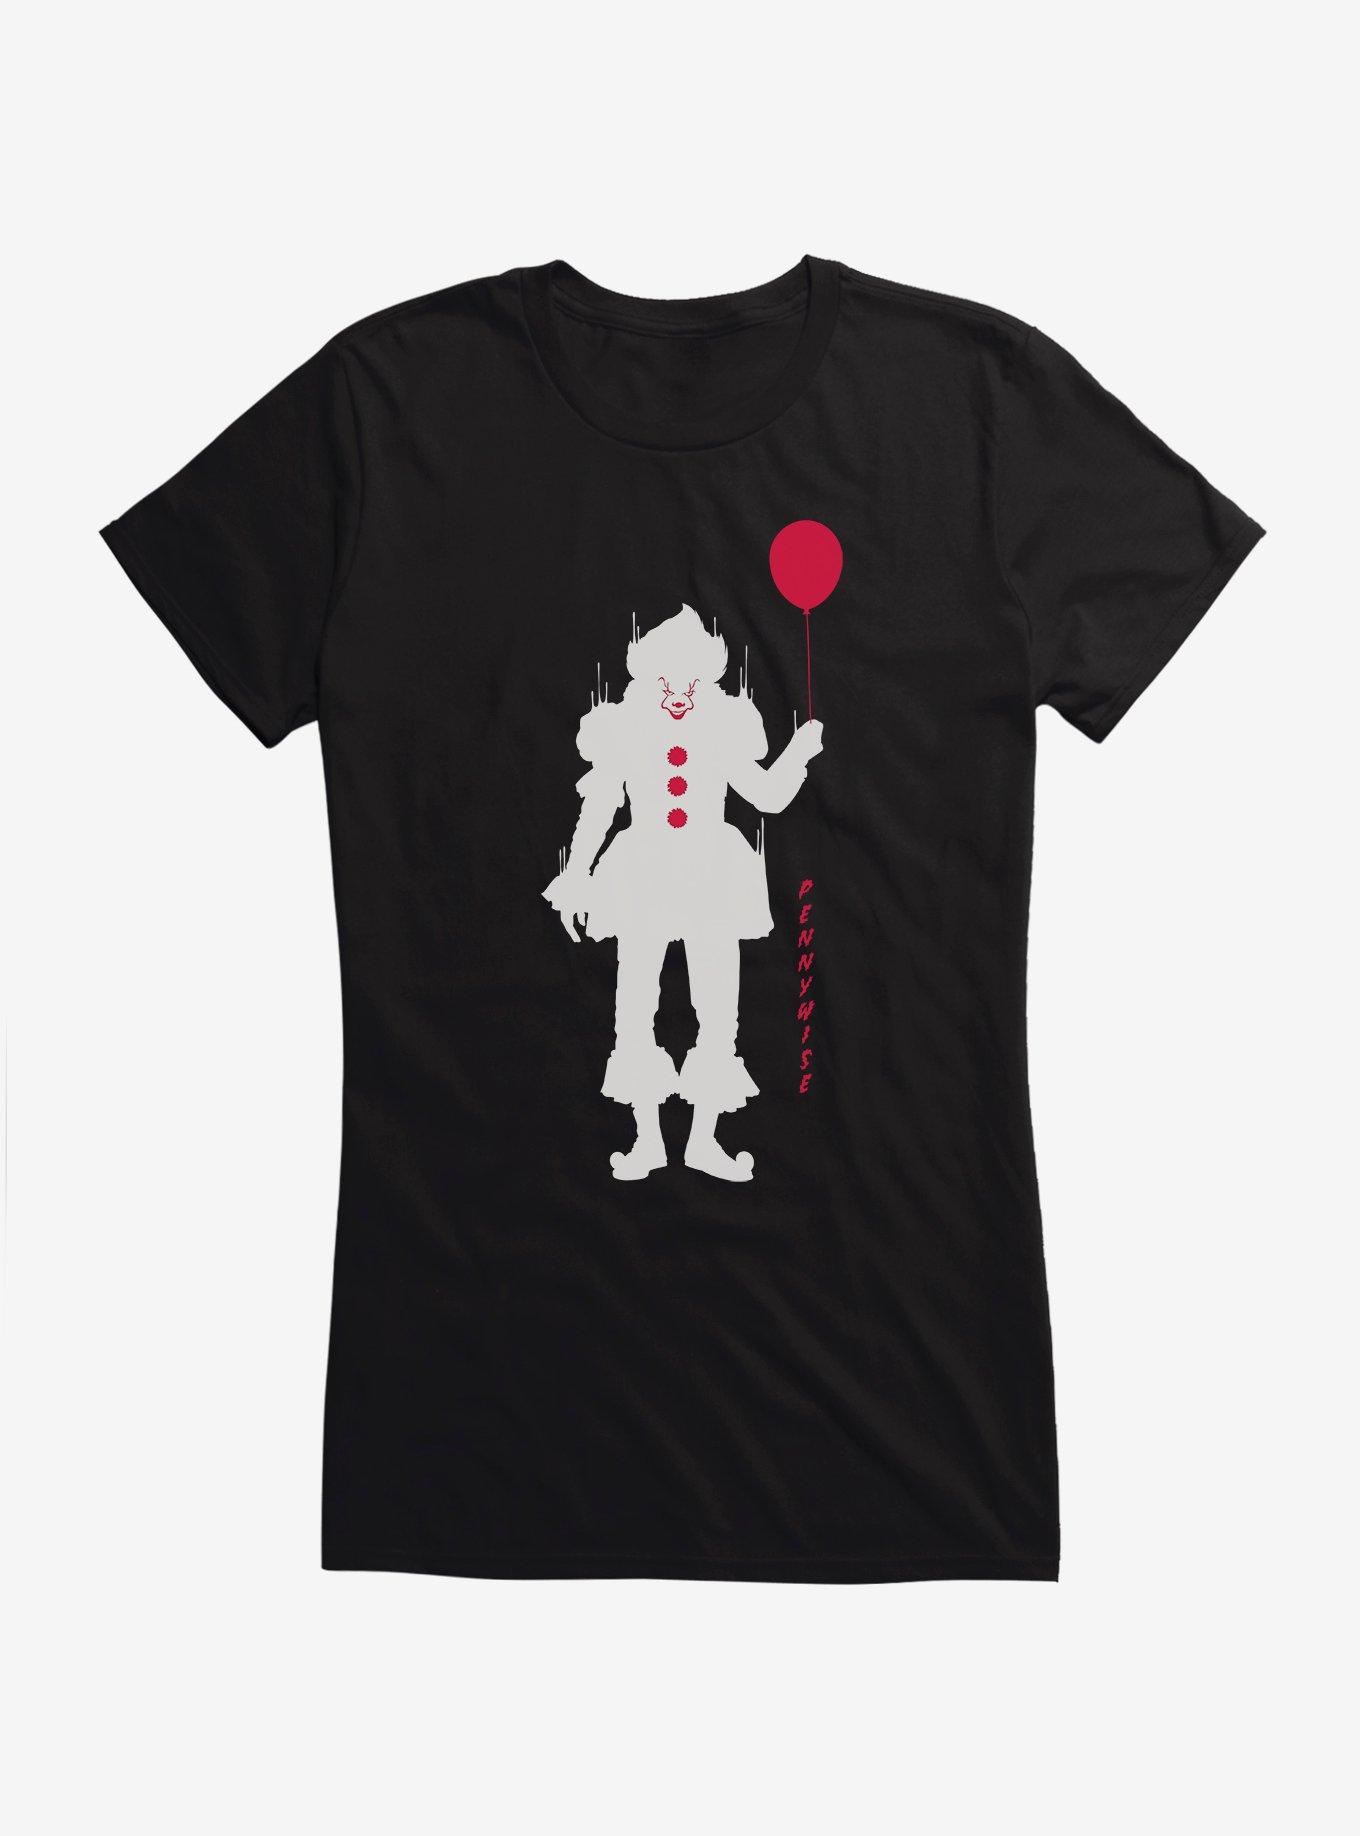 IT Chapter Two Pennywise With Balloon Girls T-Shirt, BLACK, hi-res